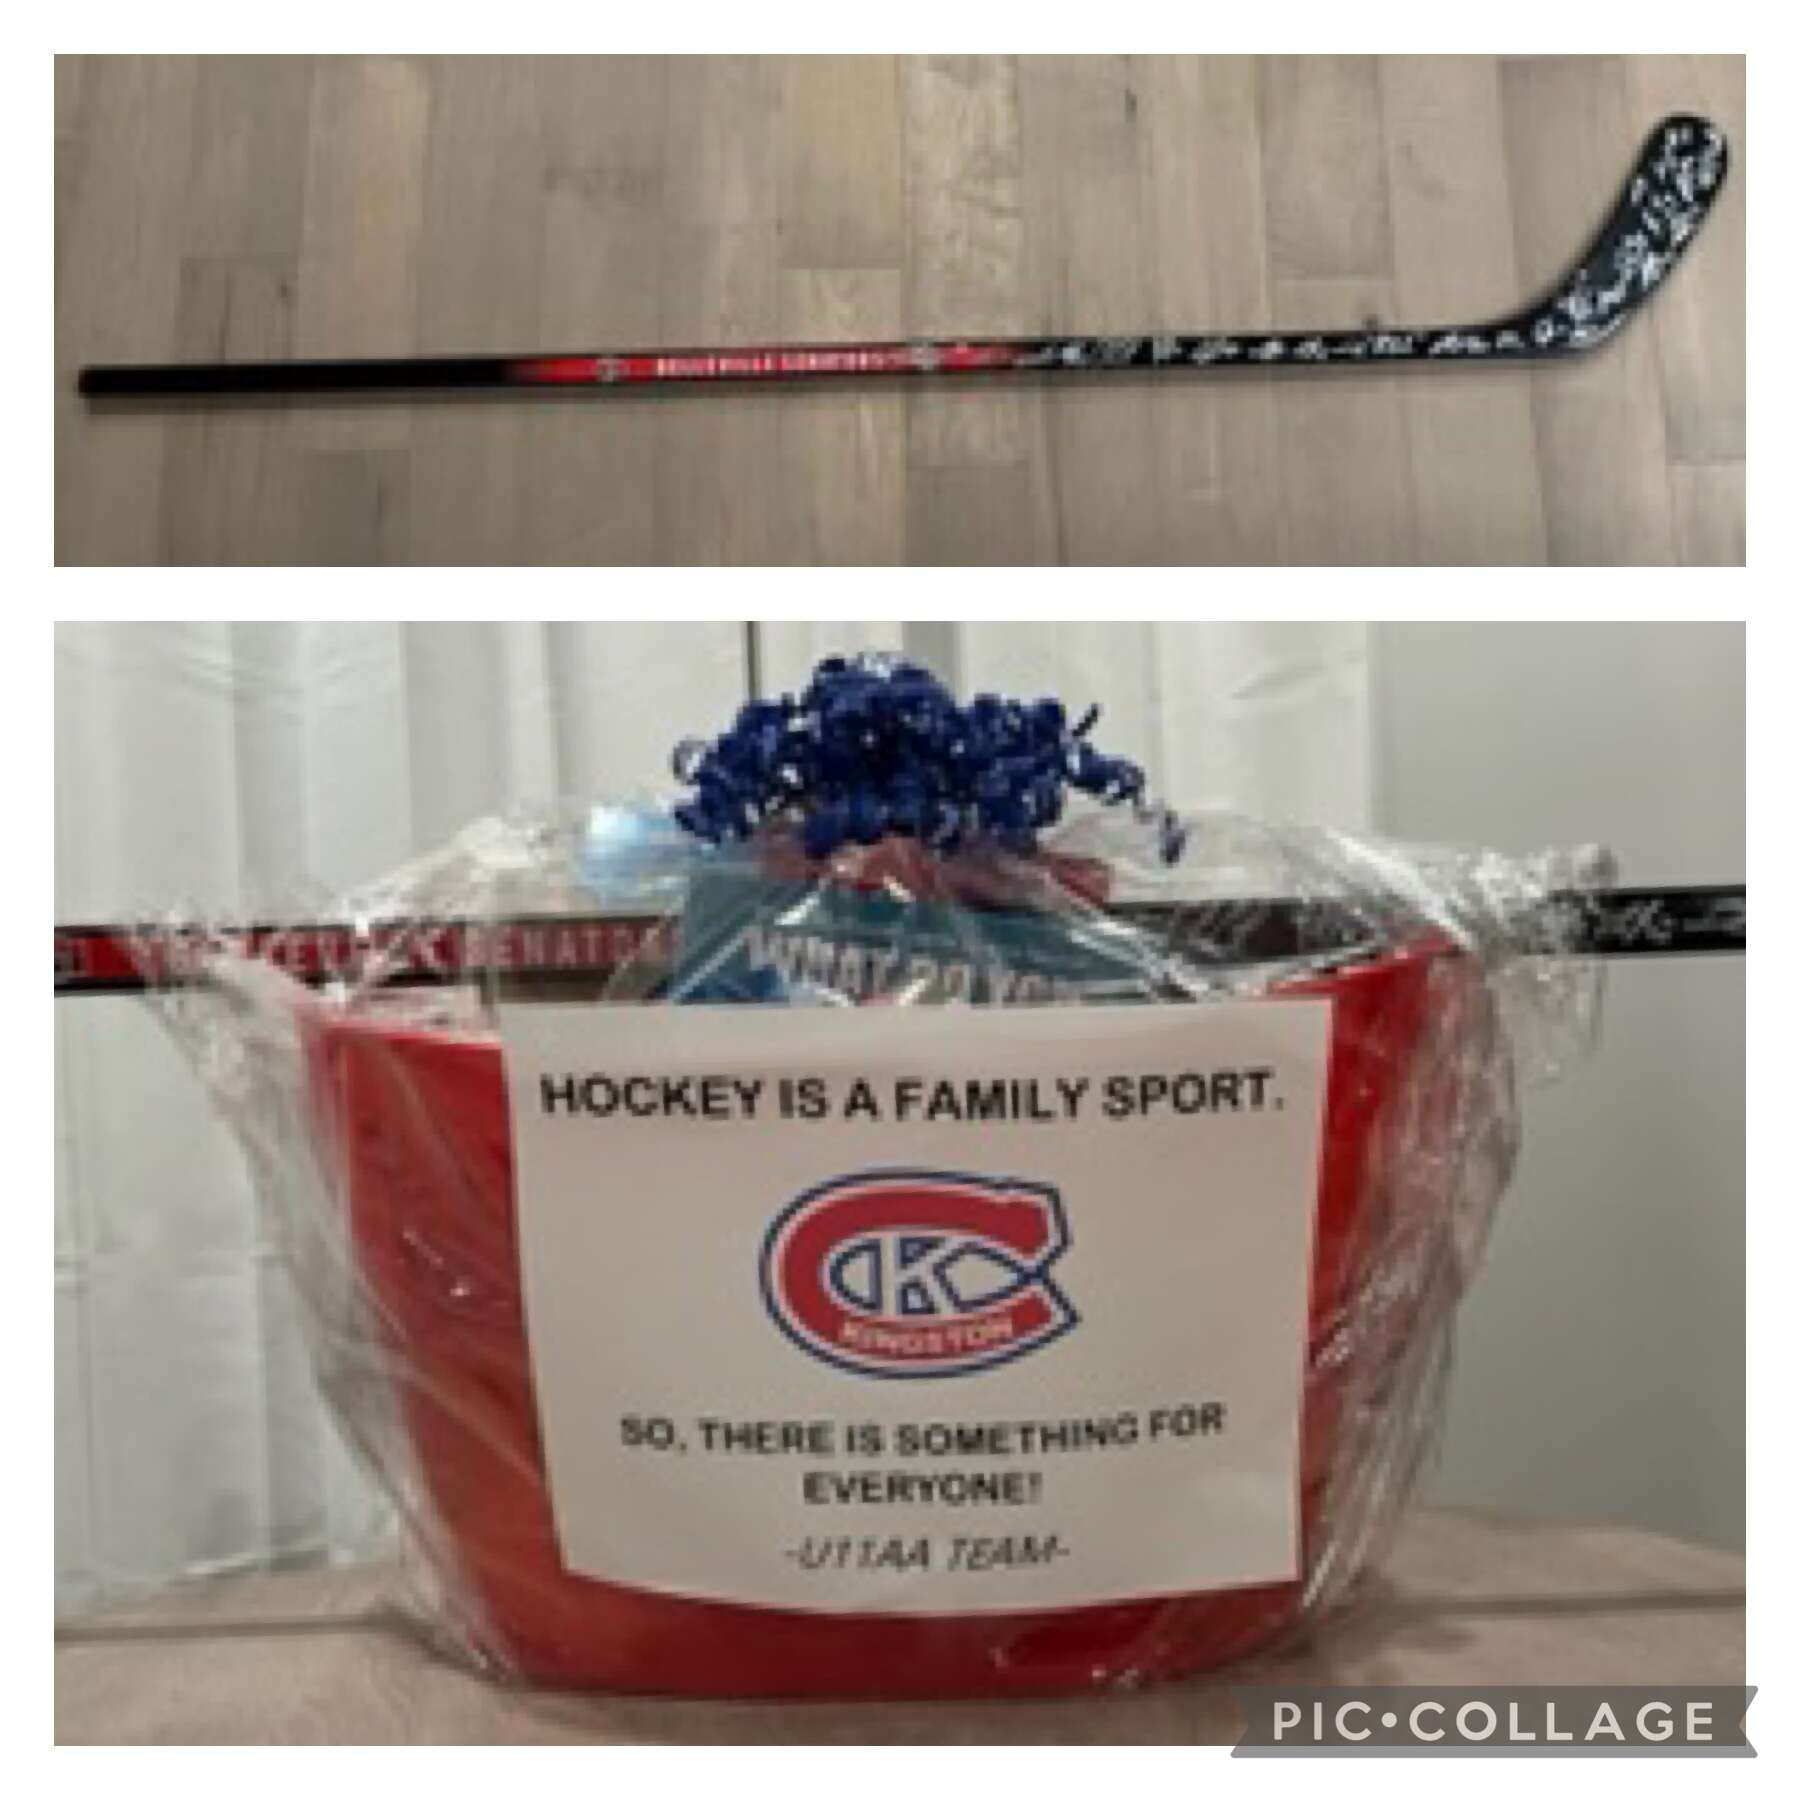 Hockey is a Family Sport - There is Something for Everyone Basket!